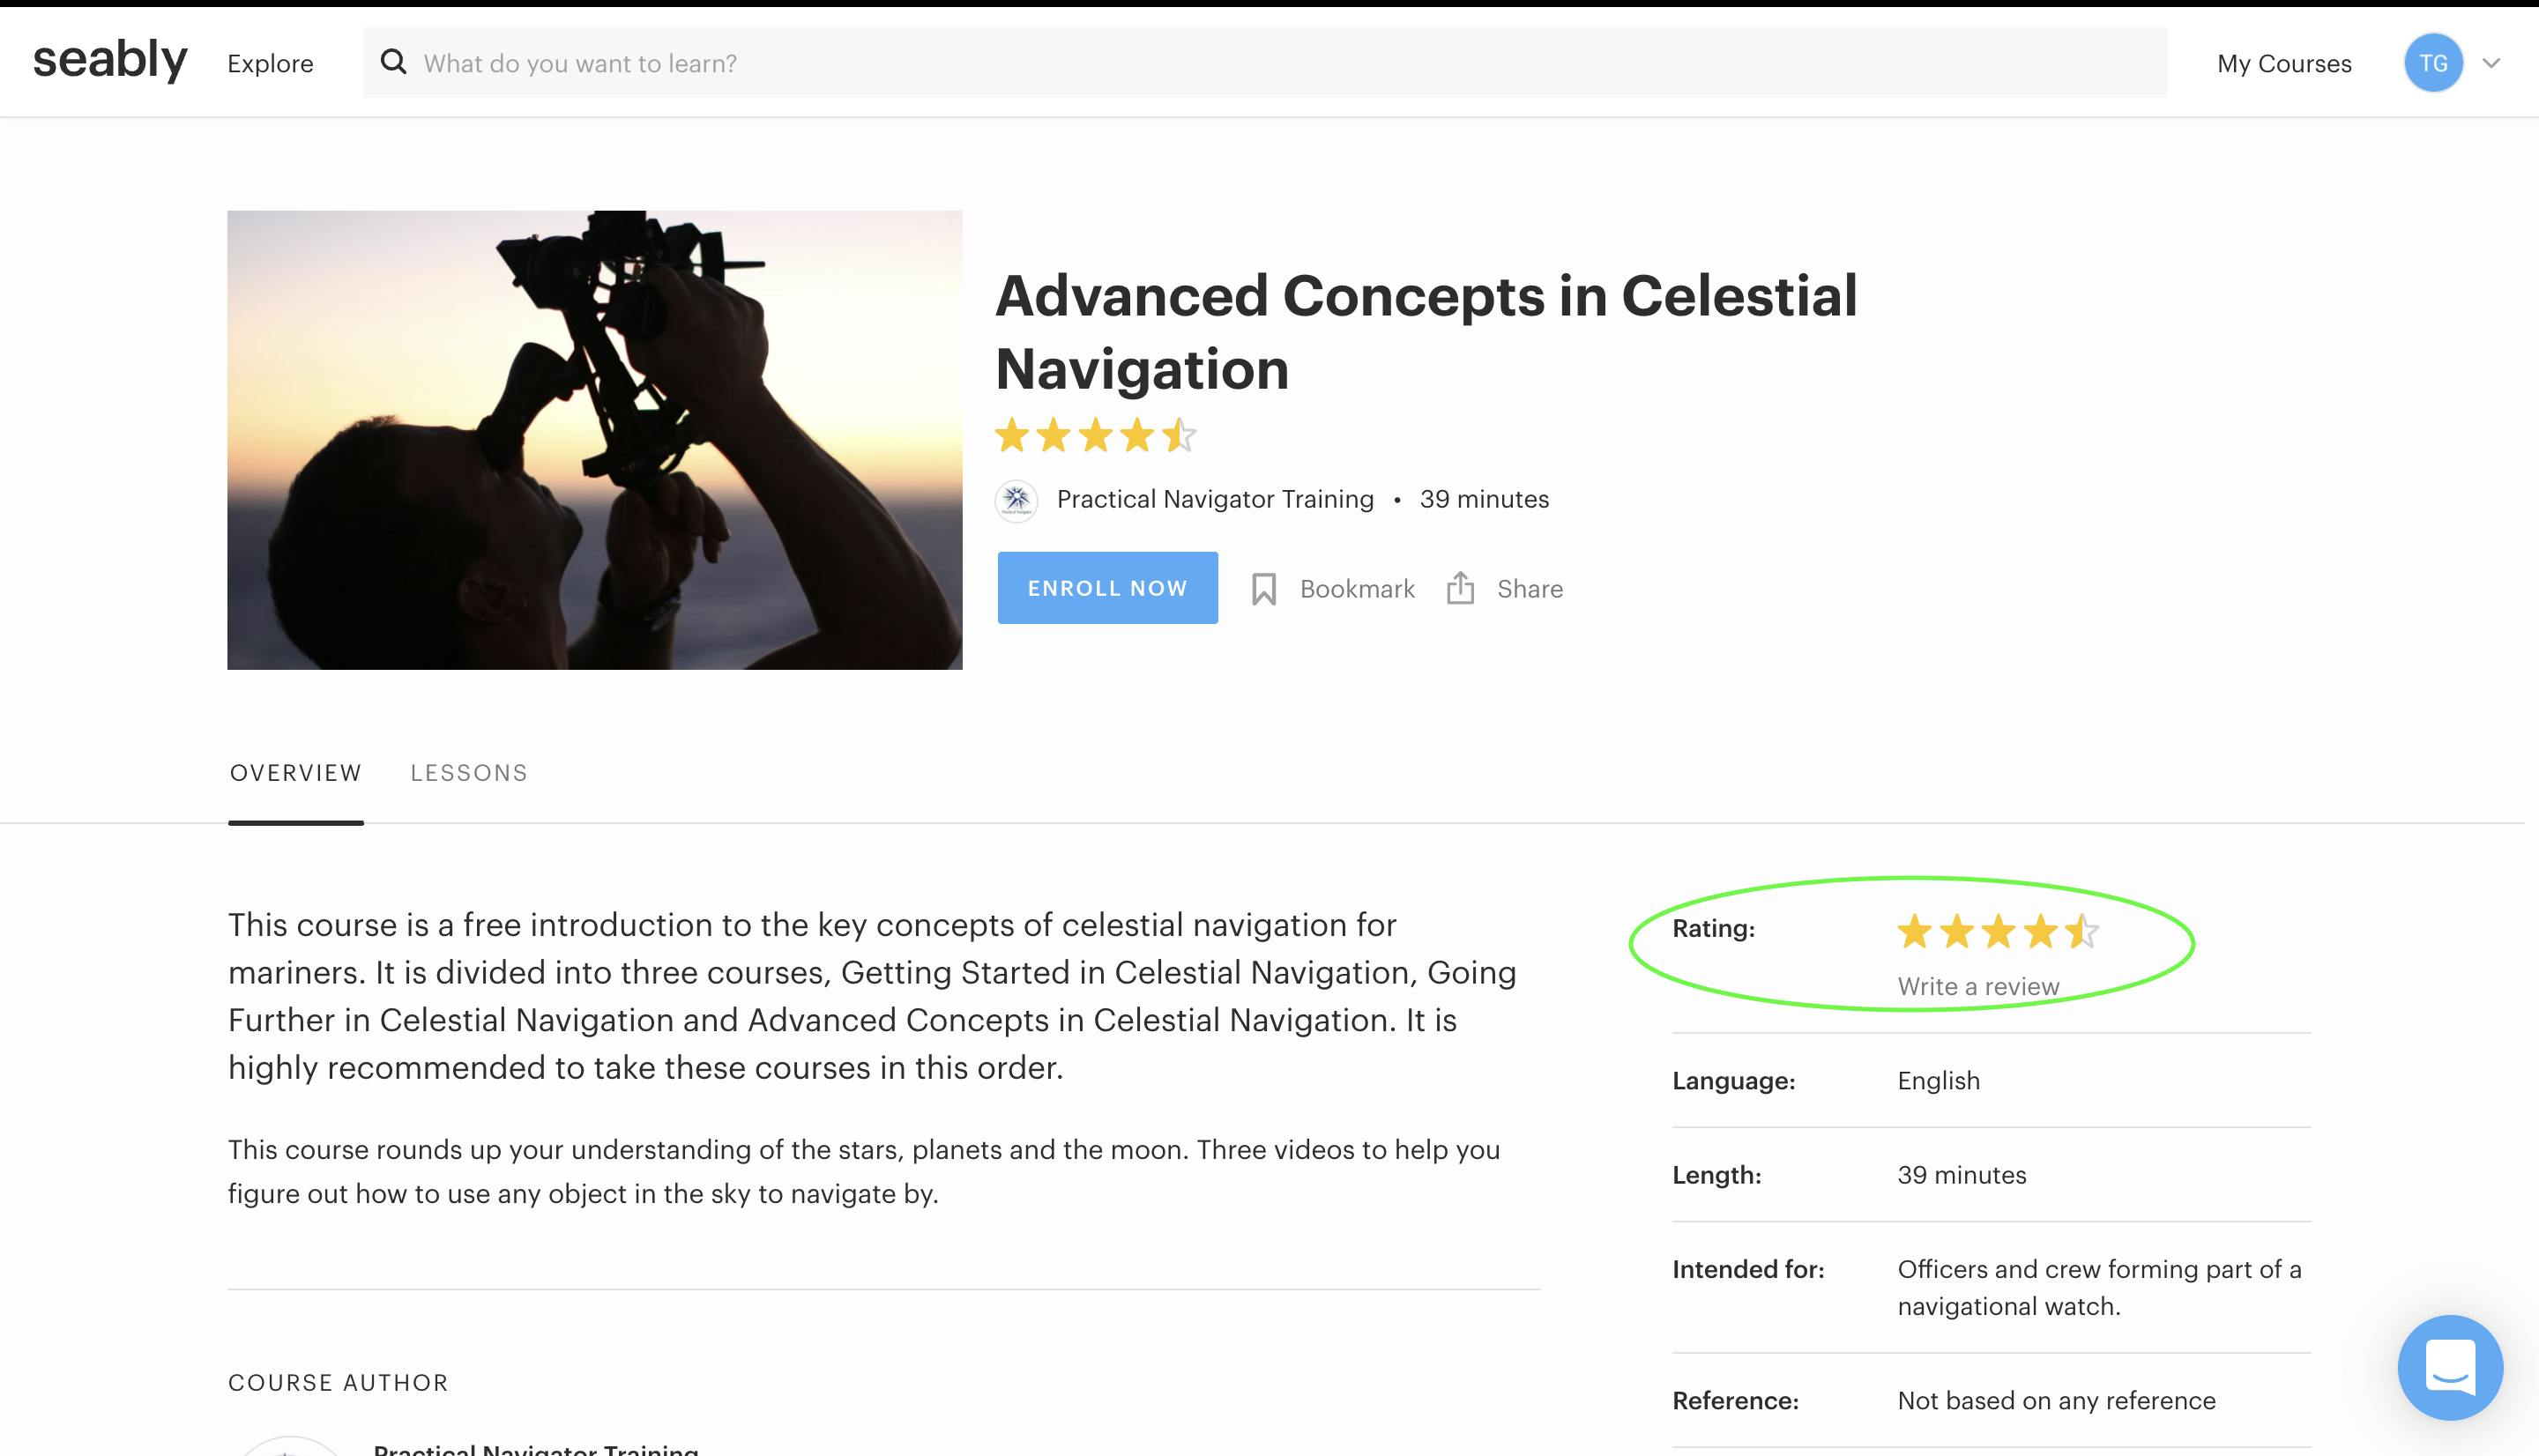 Rating for Course 'Advanced Concepts in Celestial Navigation'